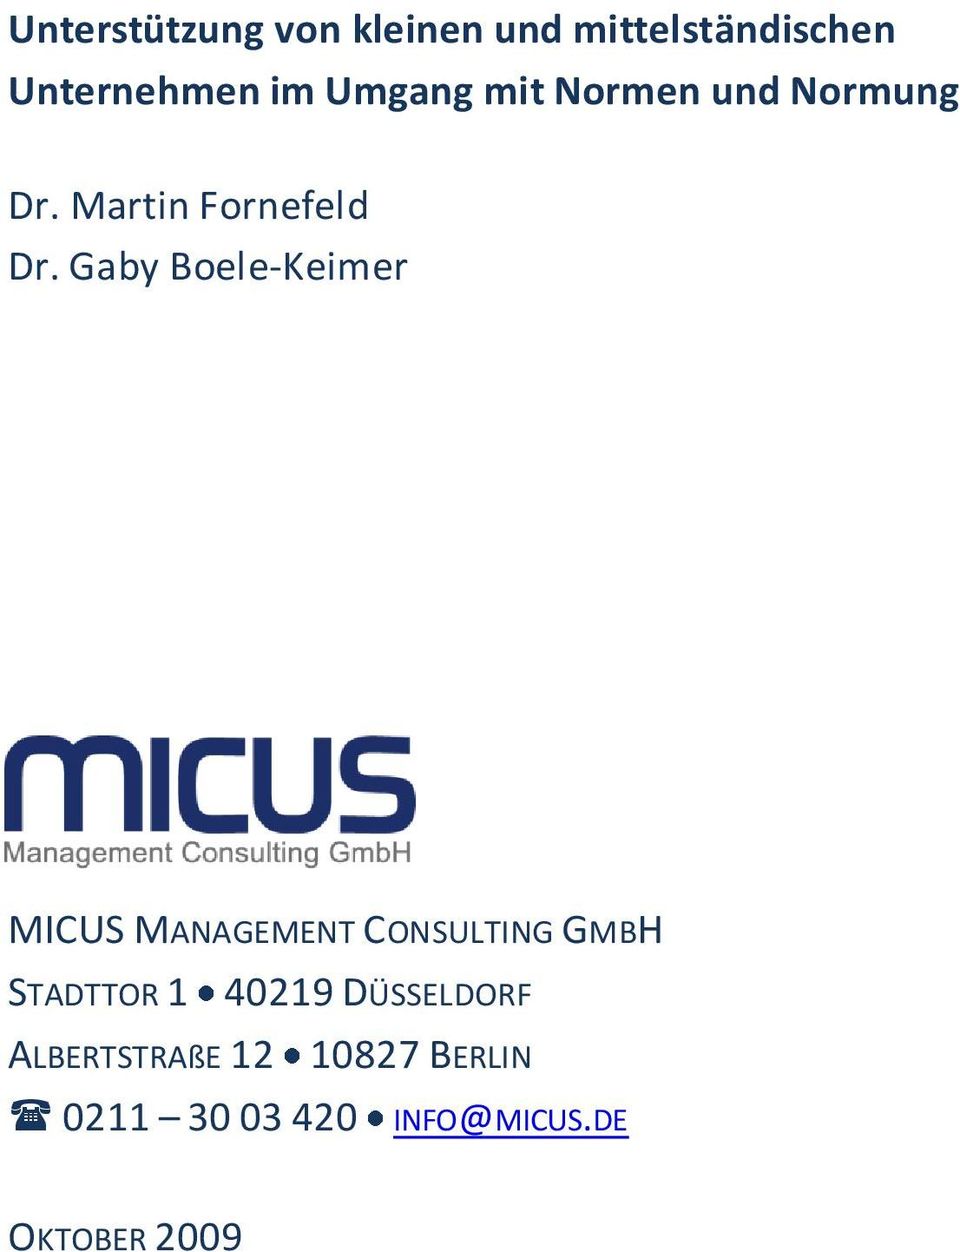 Gaby Boele-Keimer MICUS MANAGEMENT CONSULTING GMBH STADTTOR 1